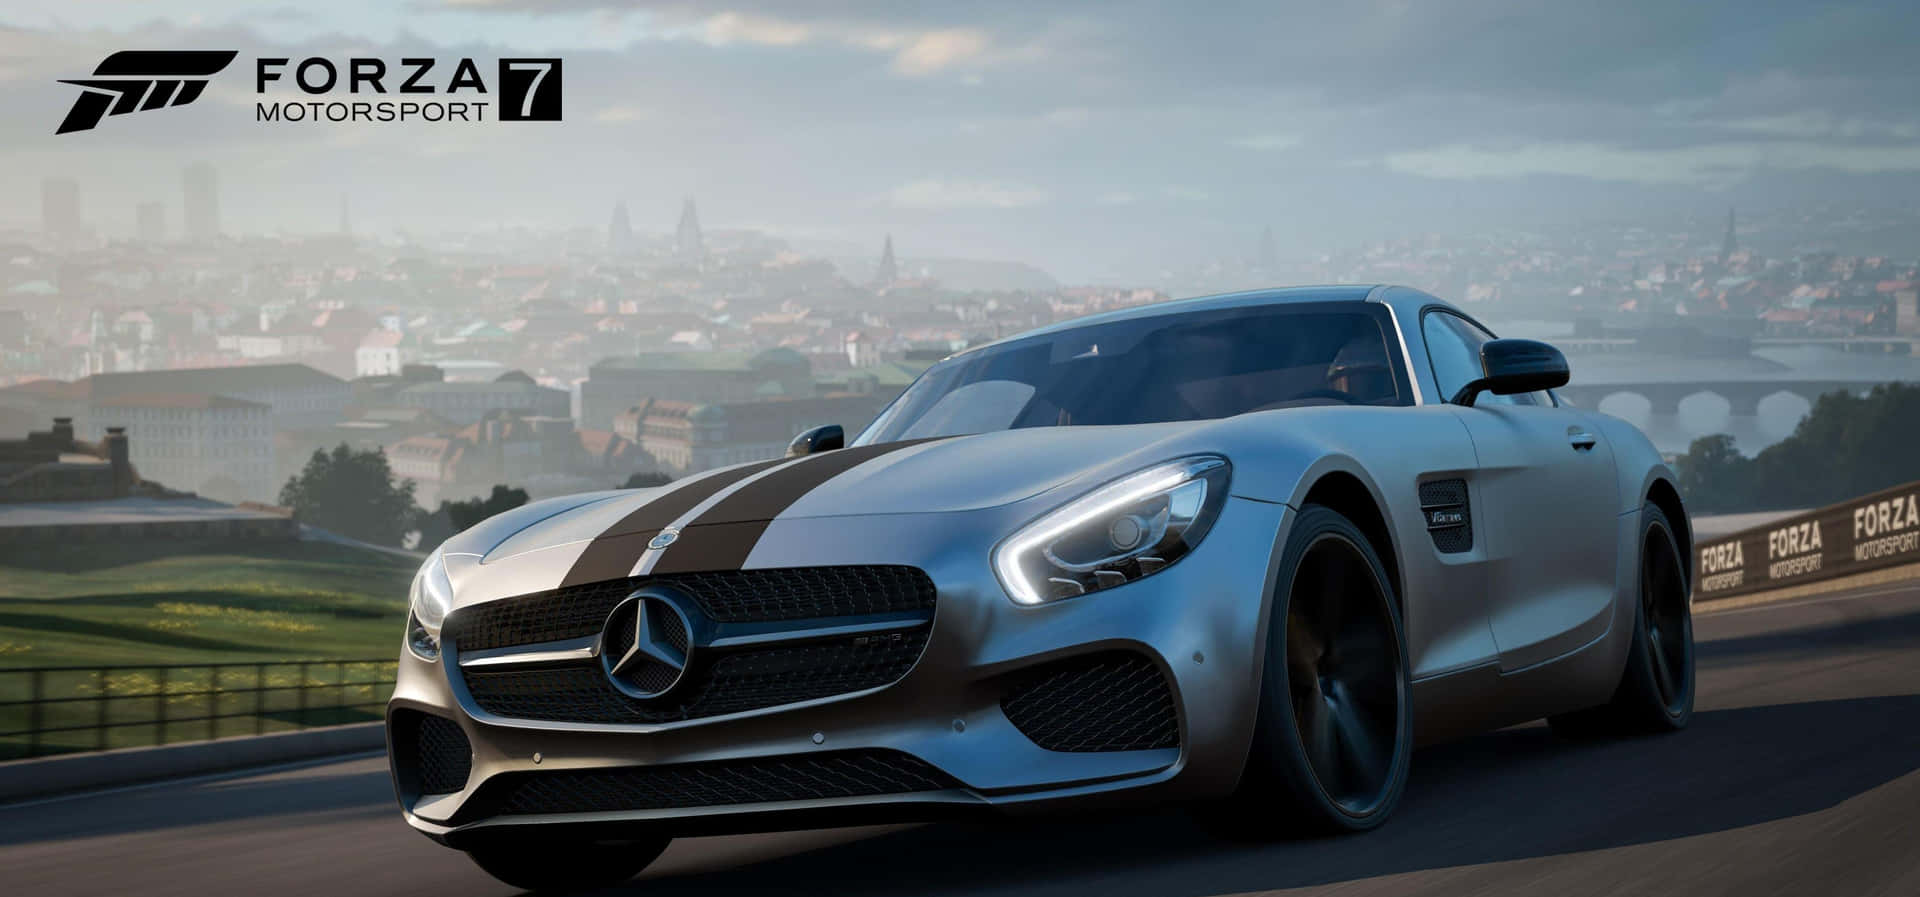 Step Into The World of Virtual Racing With Forza Motorsport 7